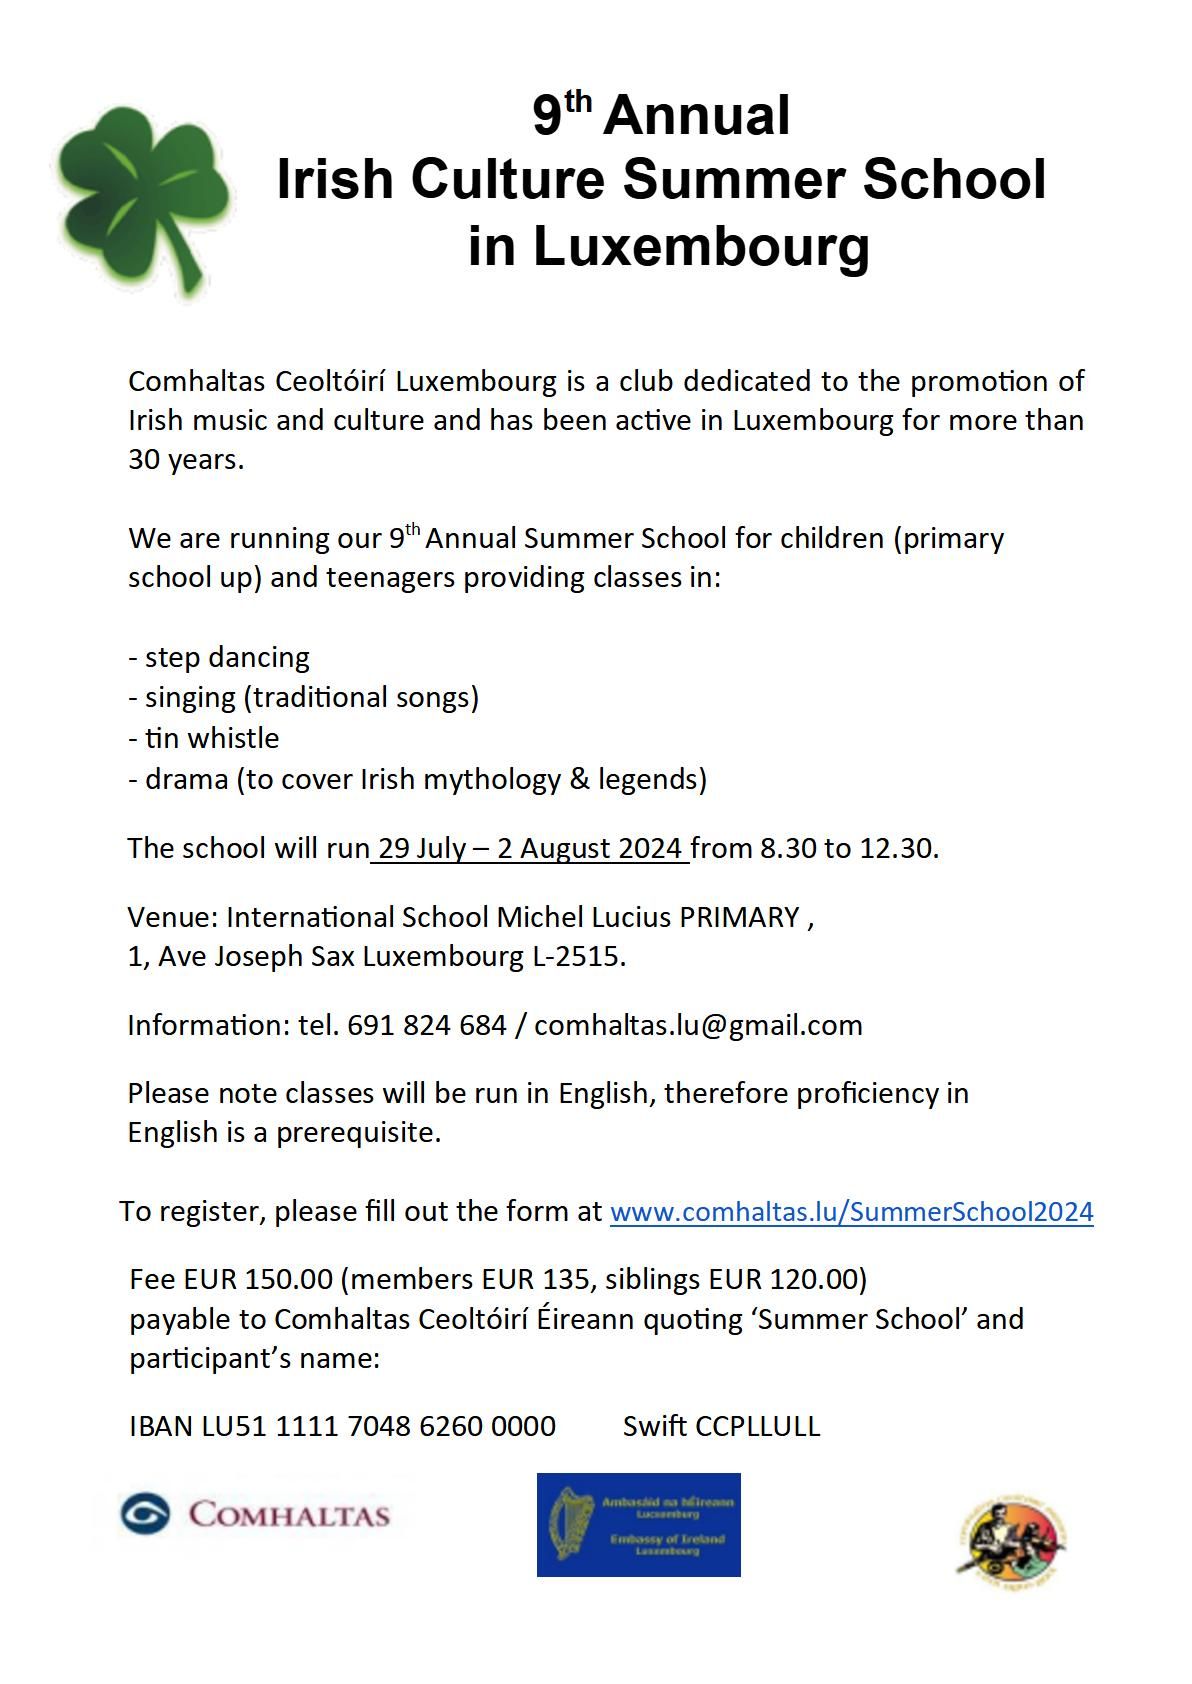 9th Annual Irish Culture Summer School back to Luxembourg